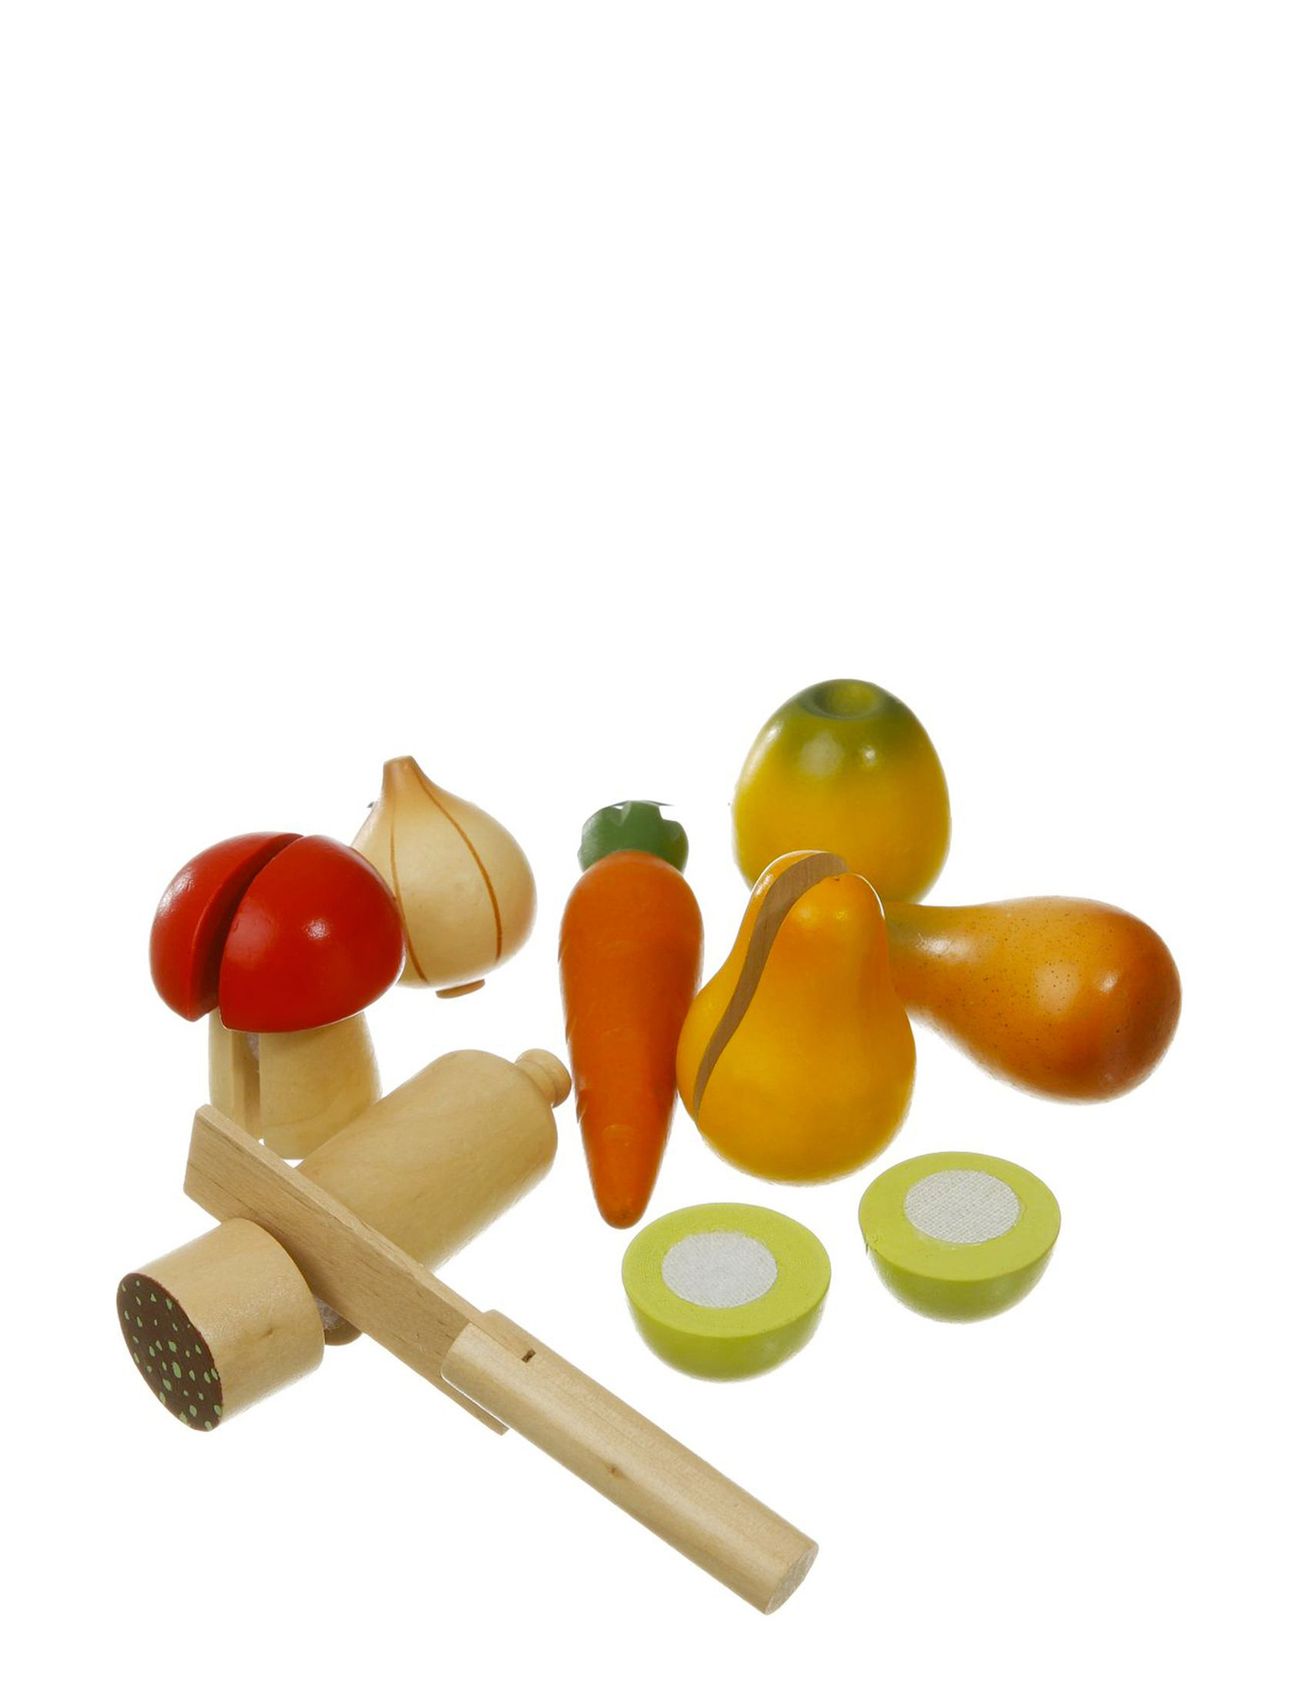 Wooden Fruit And Vegetables With Velcro Toys Toy Kitchen & Accessories Toy Food & Cakes Multi/patterned Magni Toys